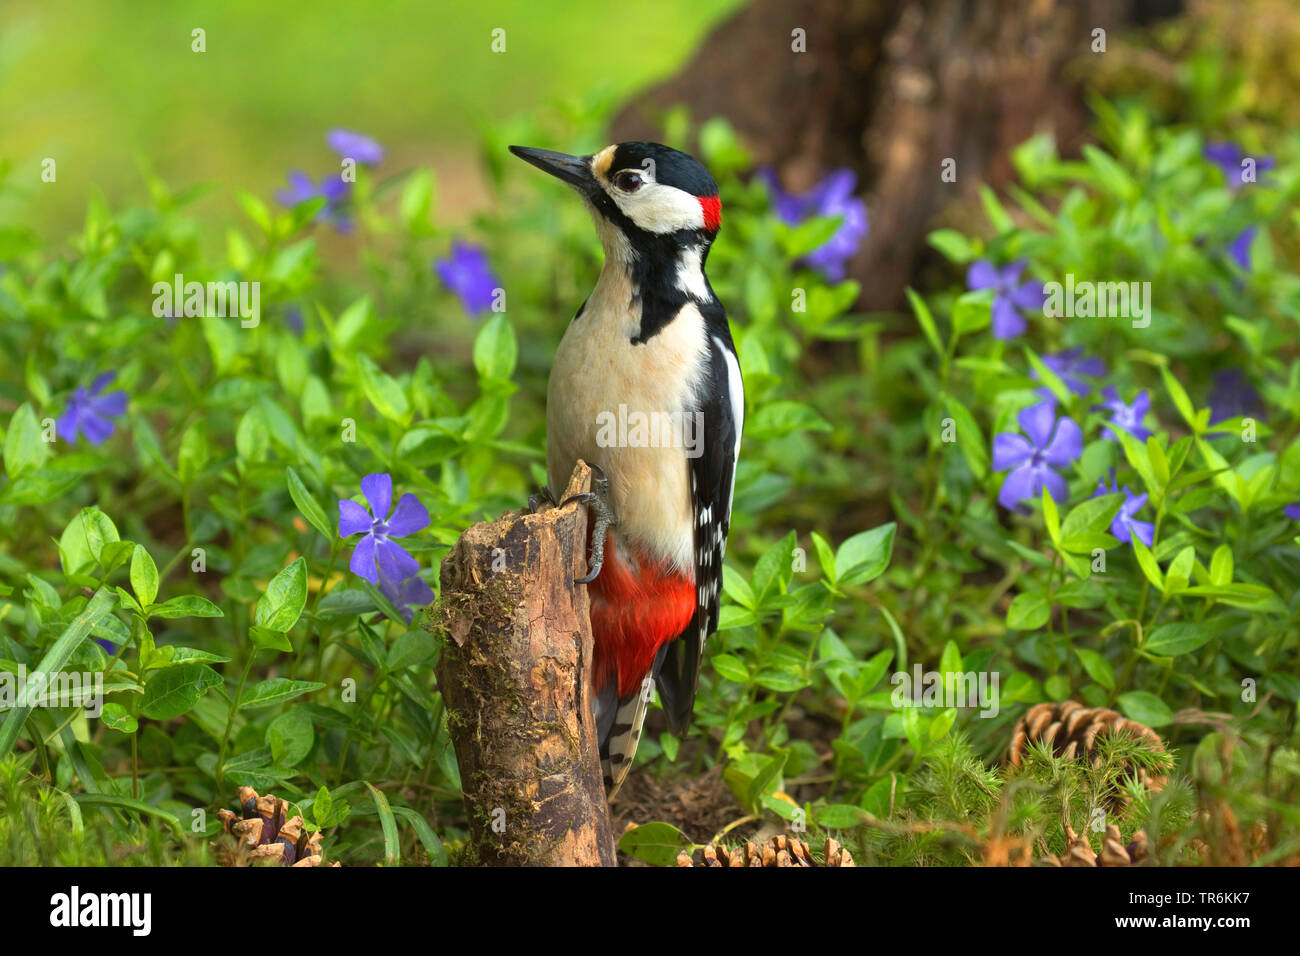 Great spotted woodpecker (Picoides major, Dendrocopos major), male sitting on a tree stumpf among periwinkle, Germany, North Rhine-Westphalia Stock Photo